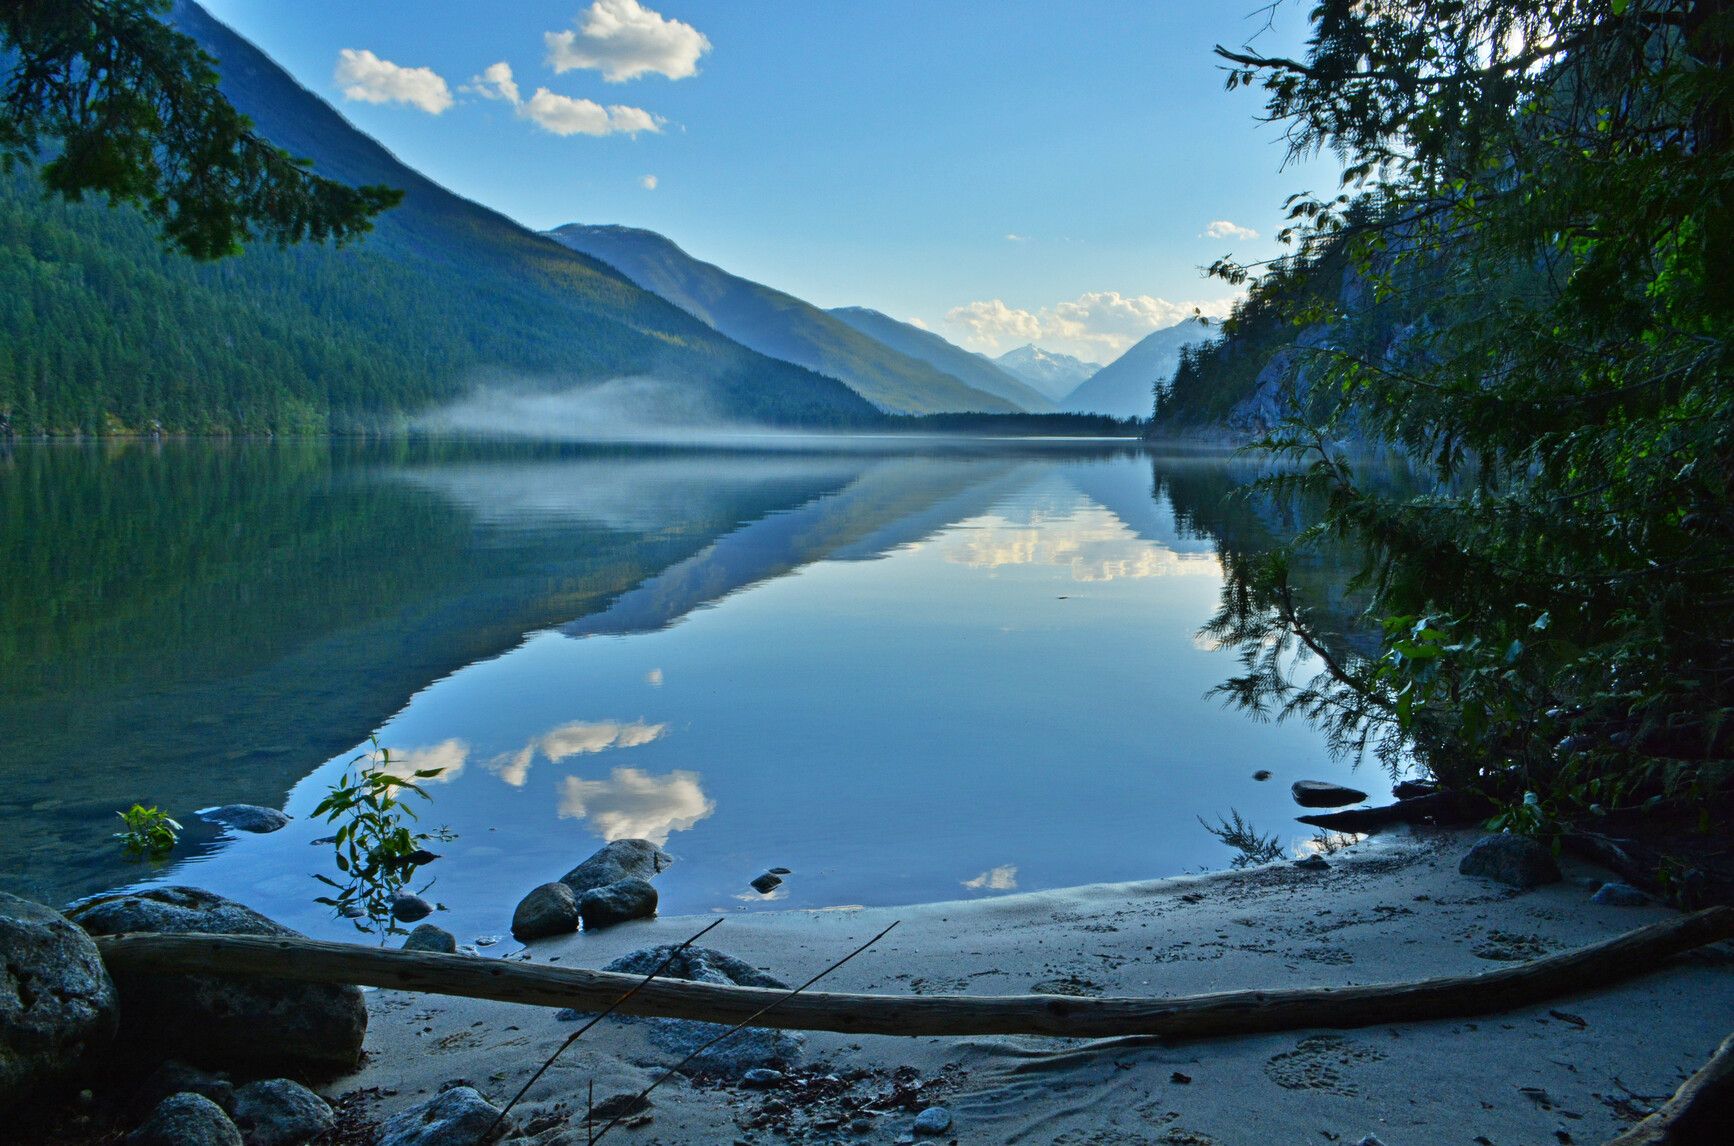 Forests, mountains, and blue sky reflect on the still water of Nahatlatch Lake at sunset.